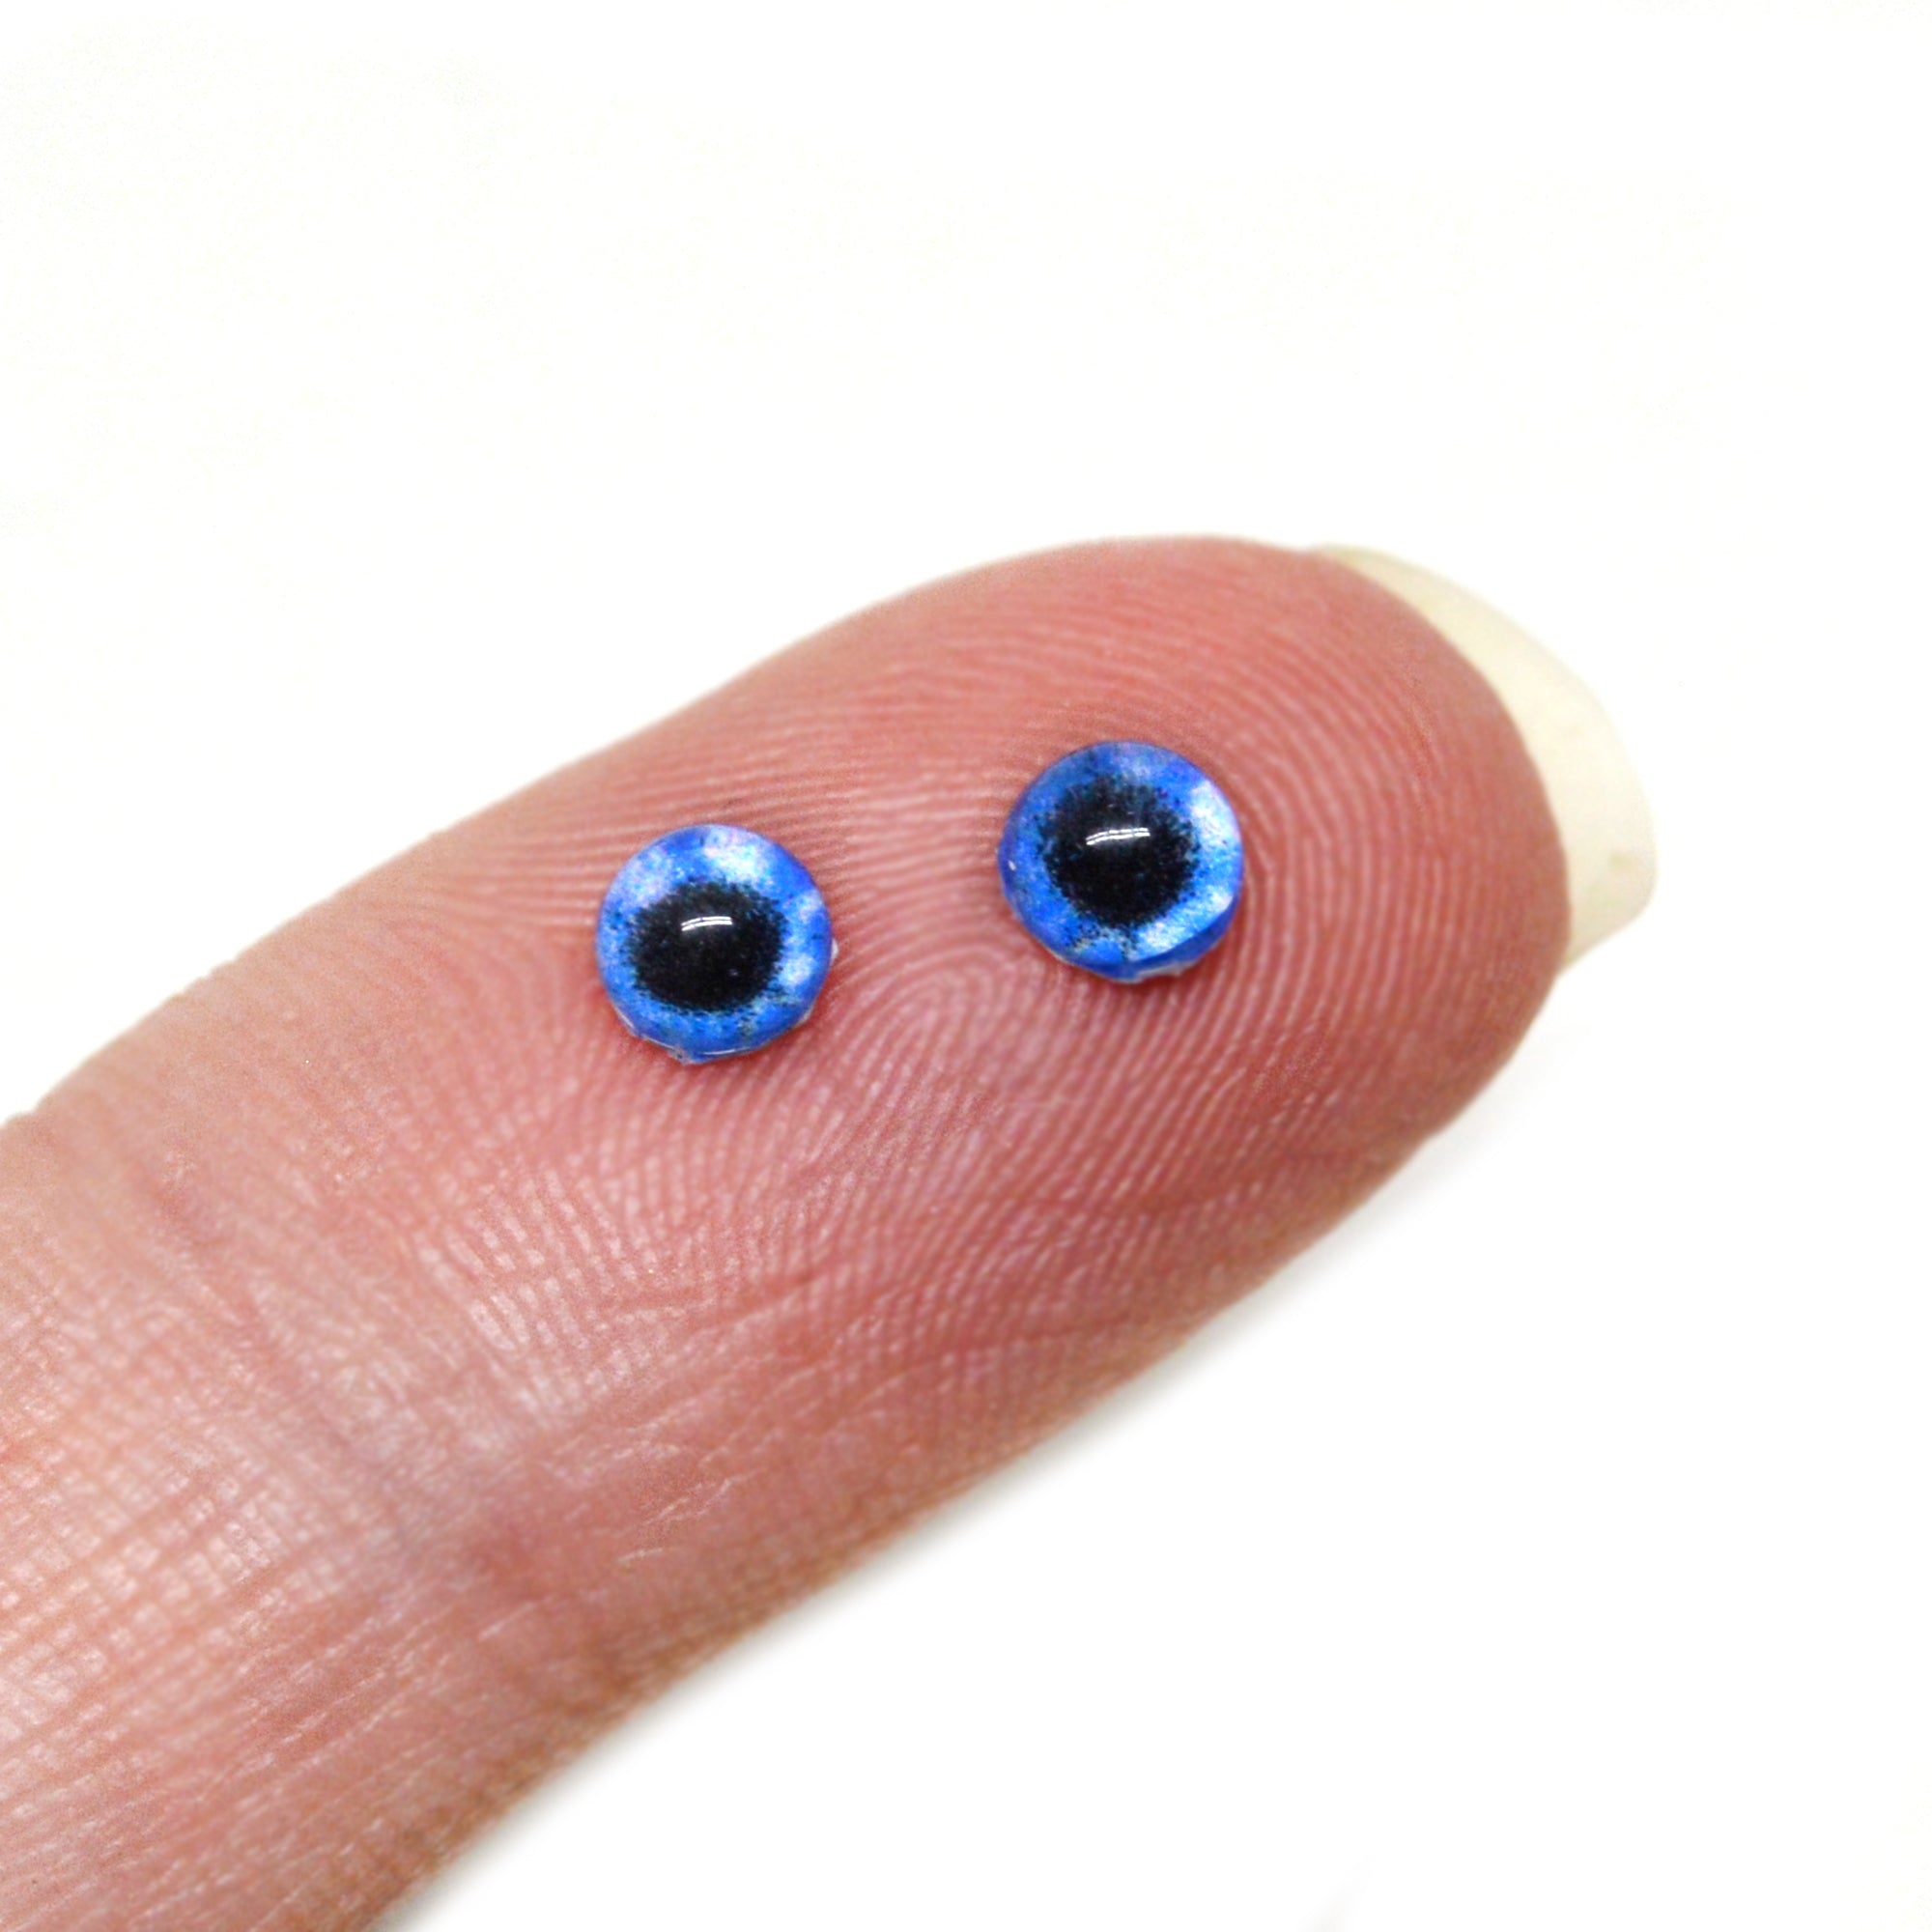 27mm Acrylic Human Glass Eyes with Vessels